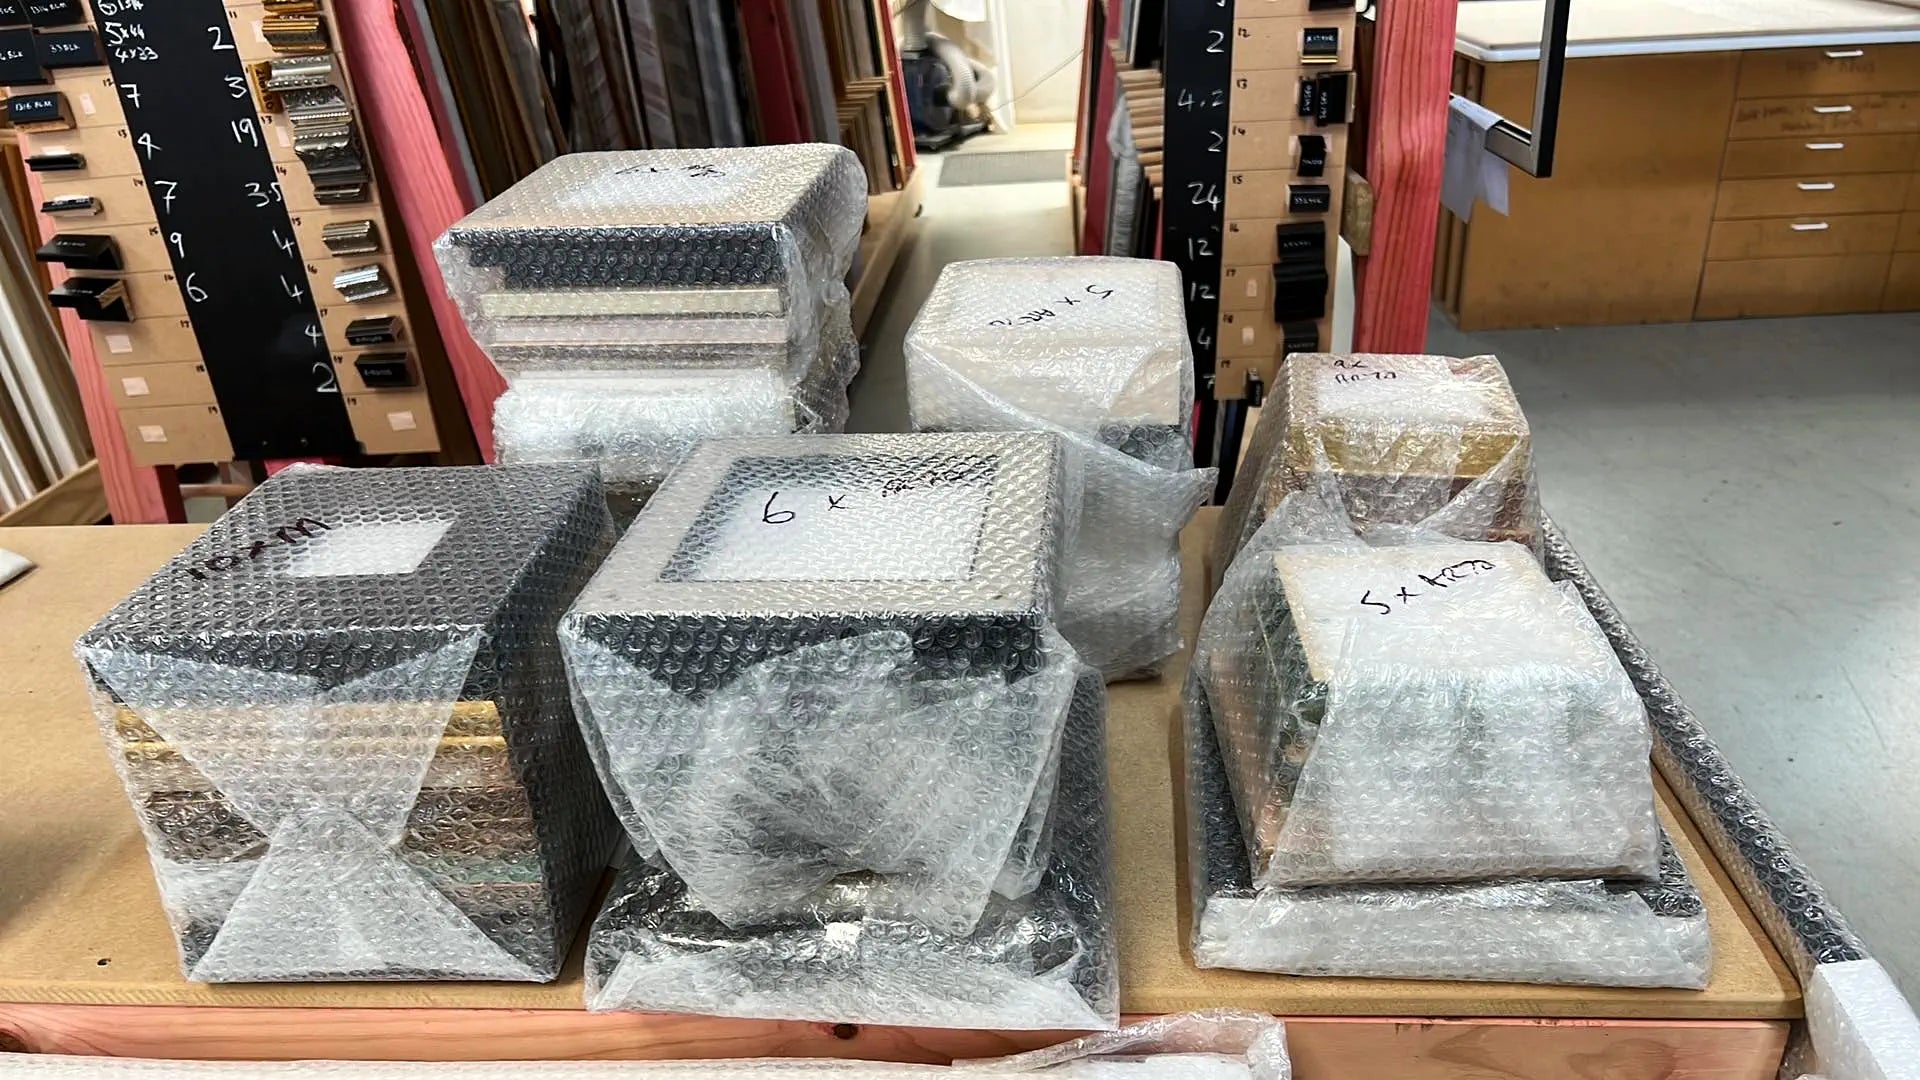 TinyArts all packaged up in bubble wrap